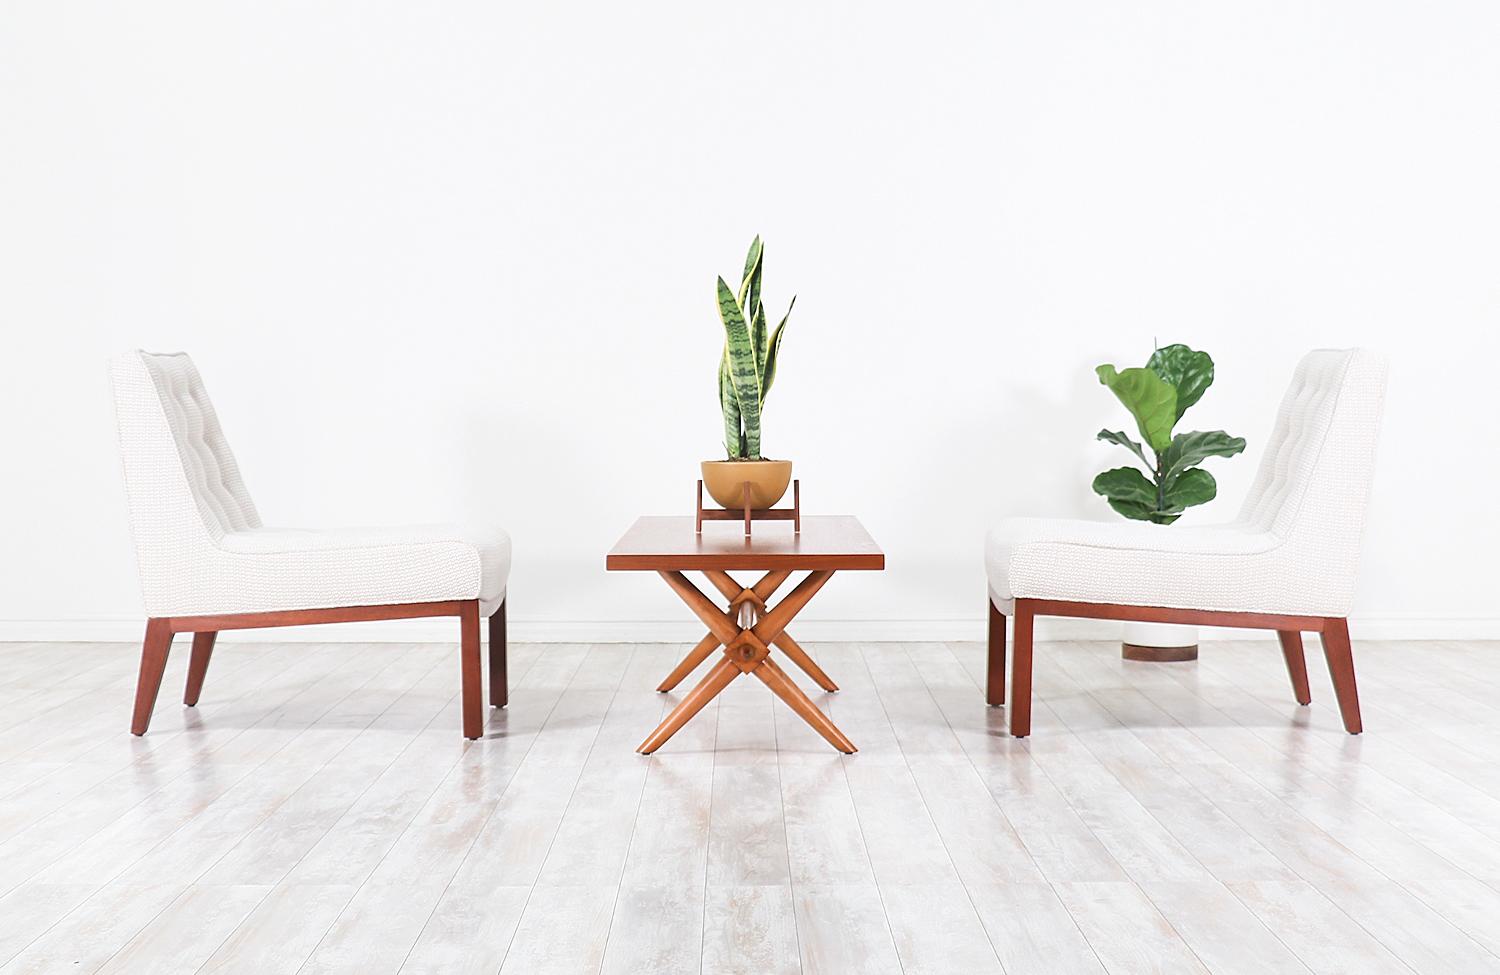 Elegant modern coffee table designed by British-born furniture designer and architect T.H. Robsjohn-Gibbings and manufactured by Widdicomb in the United States, circa 1950s. This timeless design features a rectangular walnut wood top supported by an